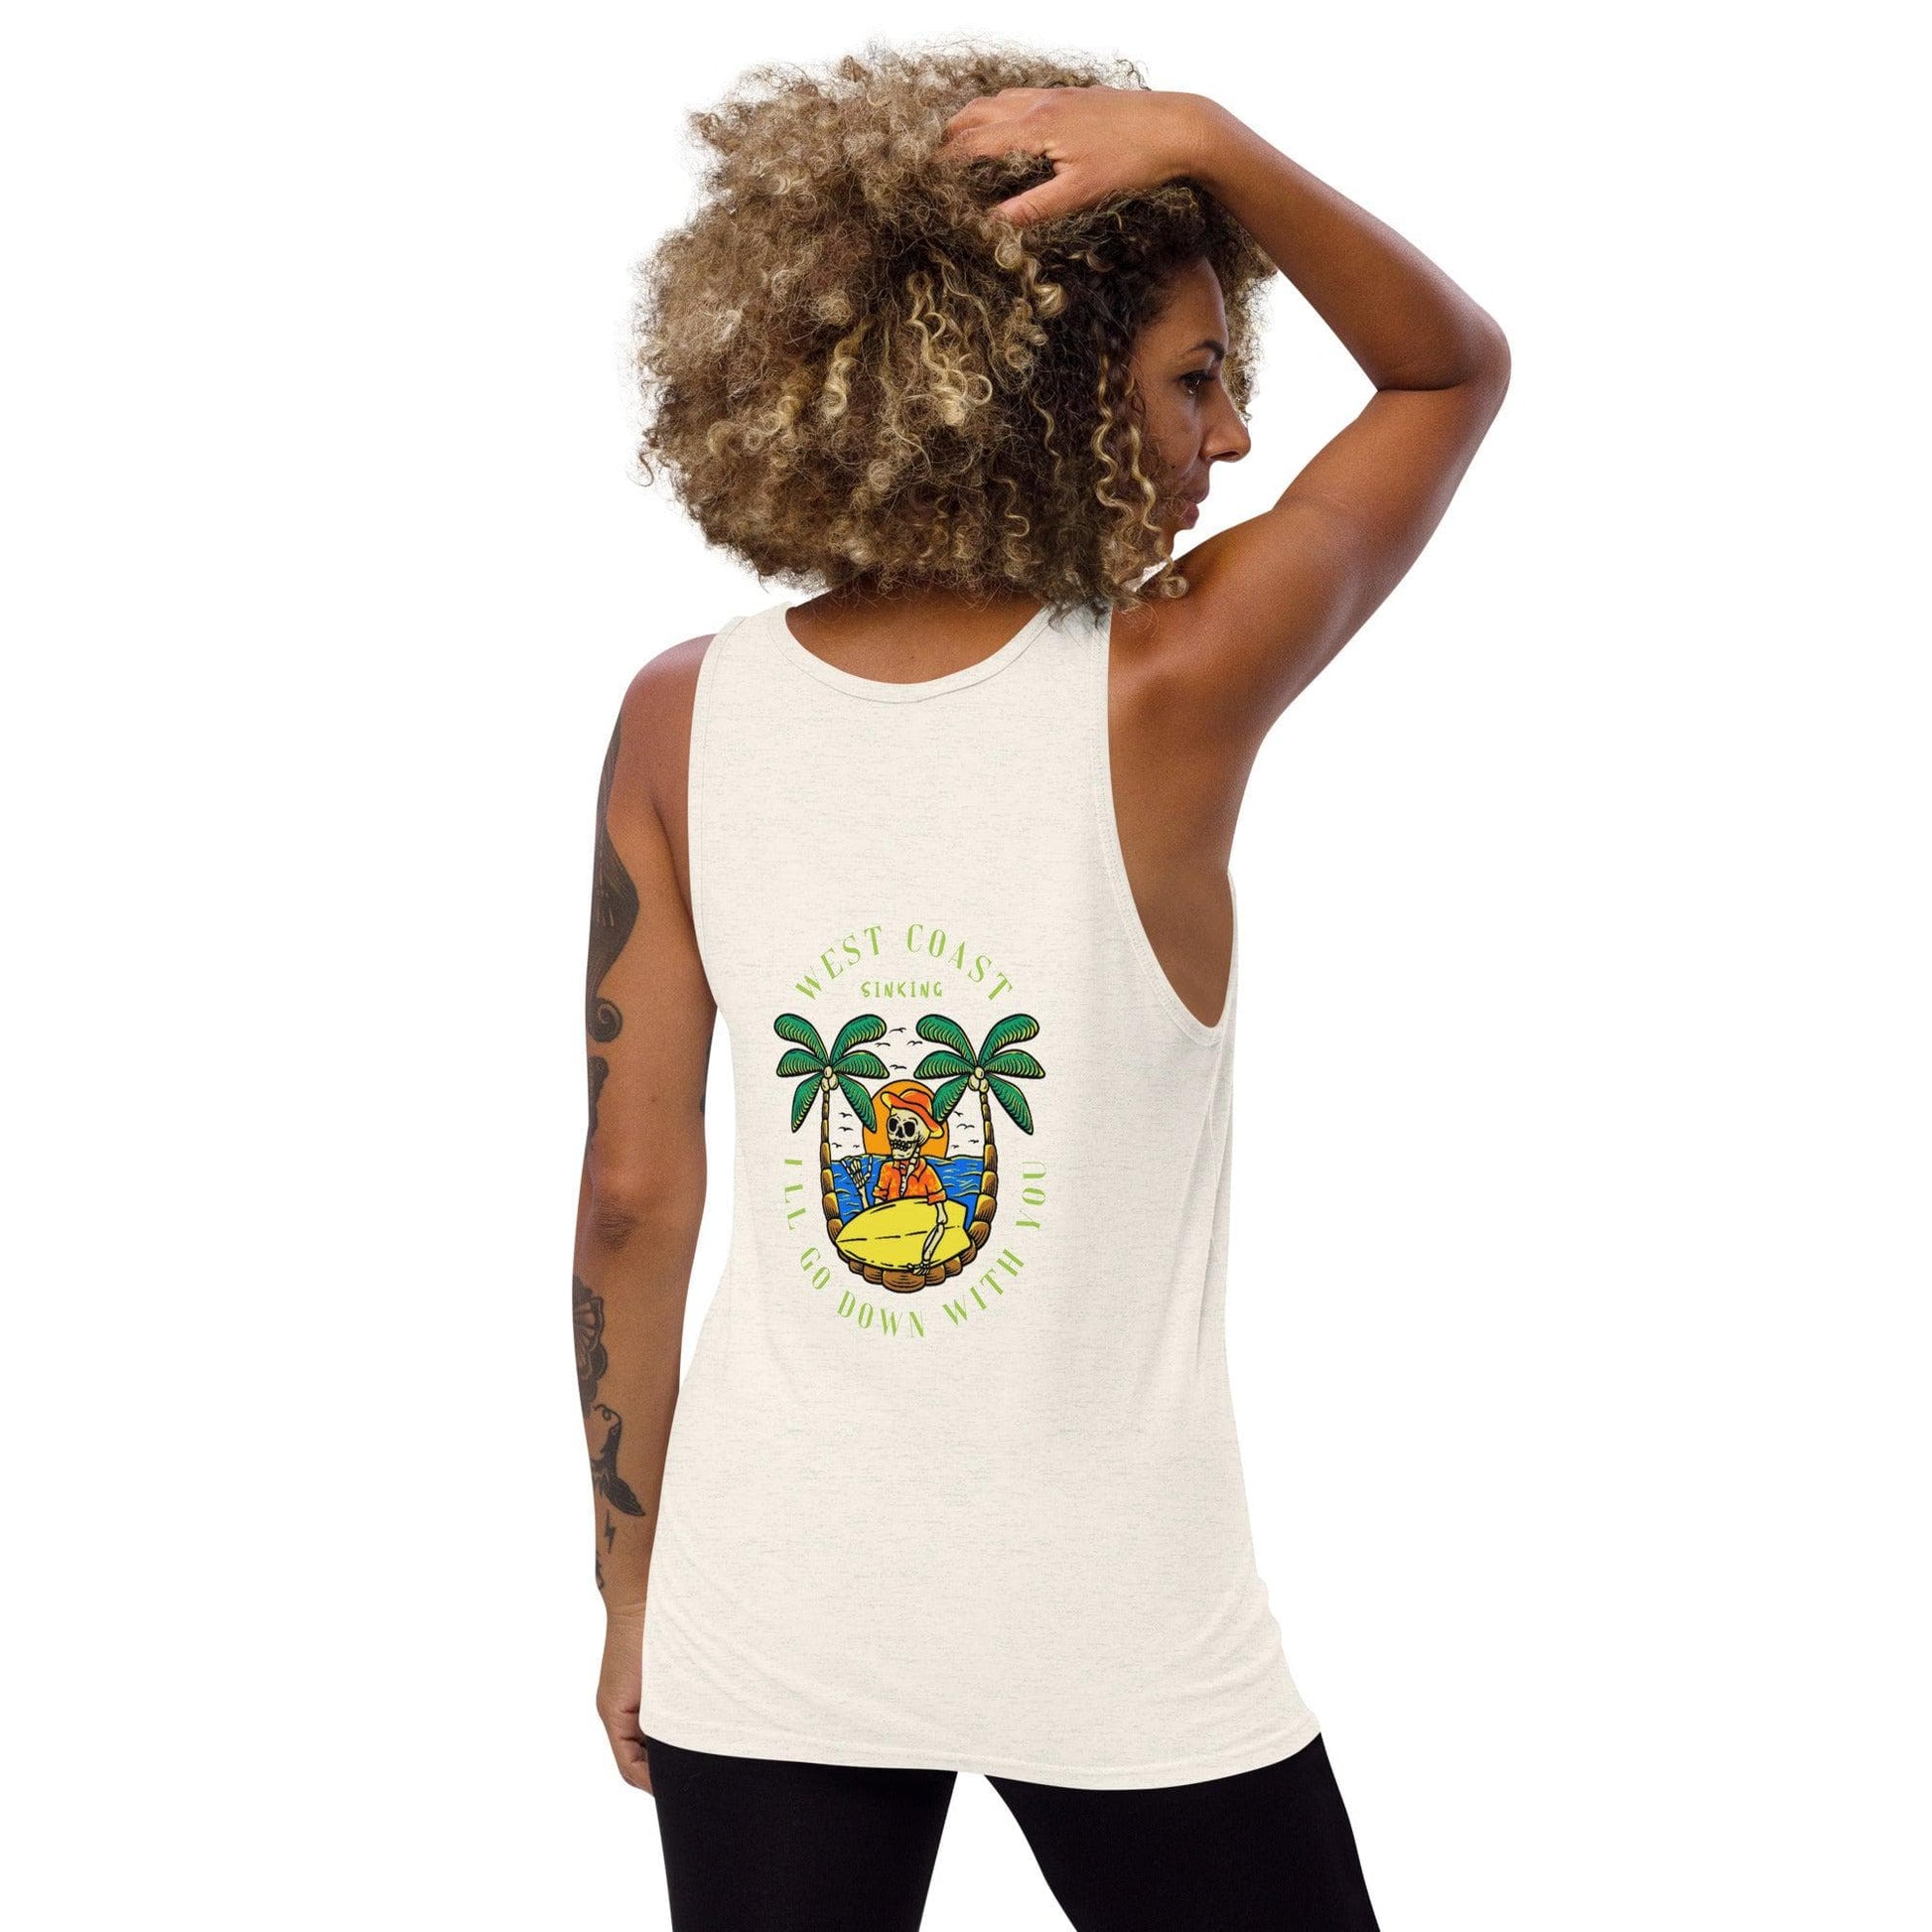 Local Summer Collective Oatmeal Triblend / XS West Coast Sinking Unisex Tank Top